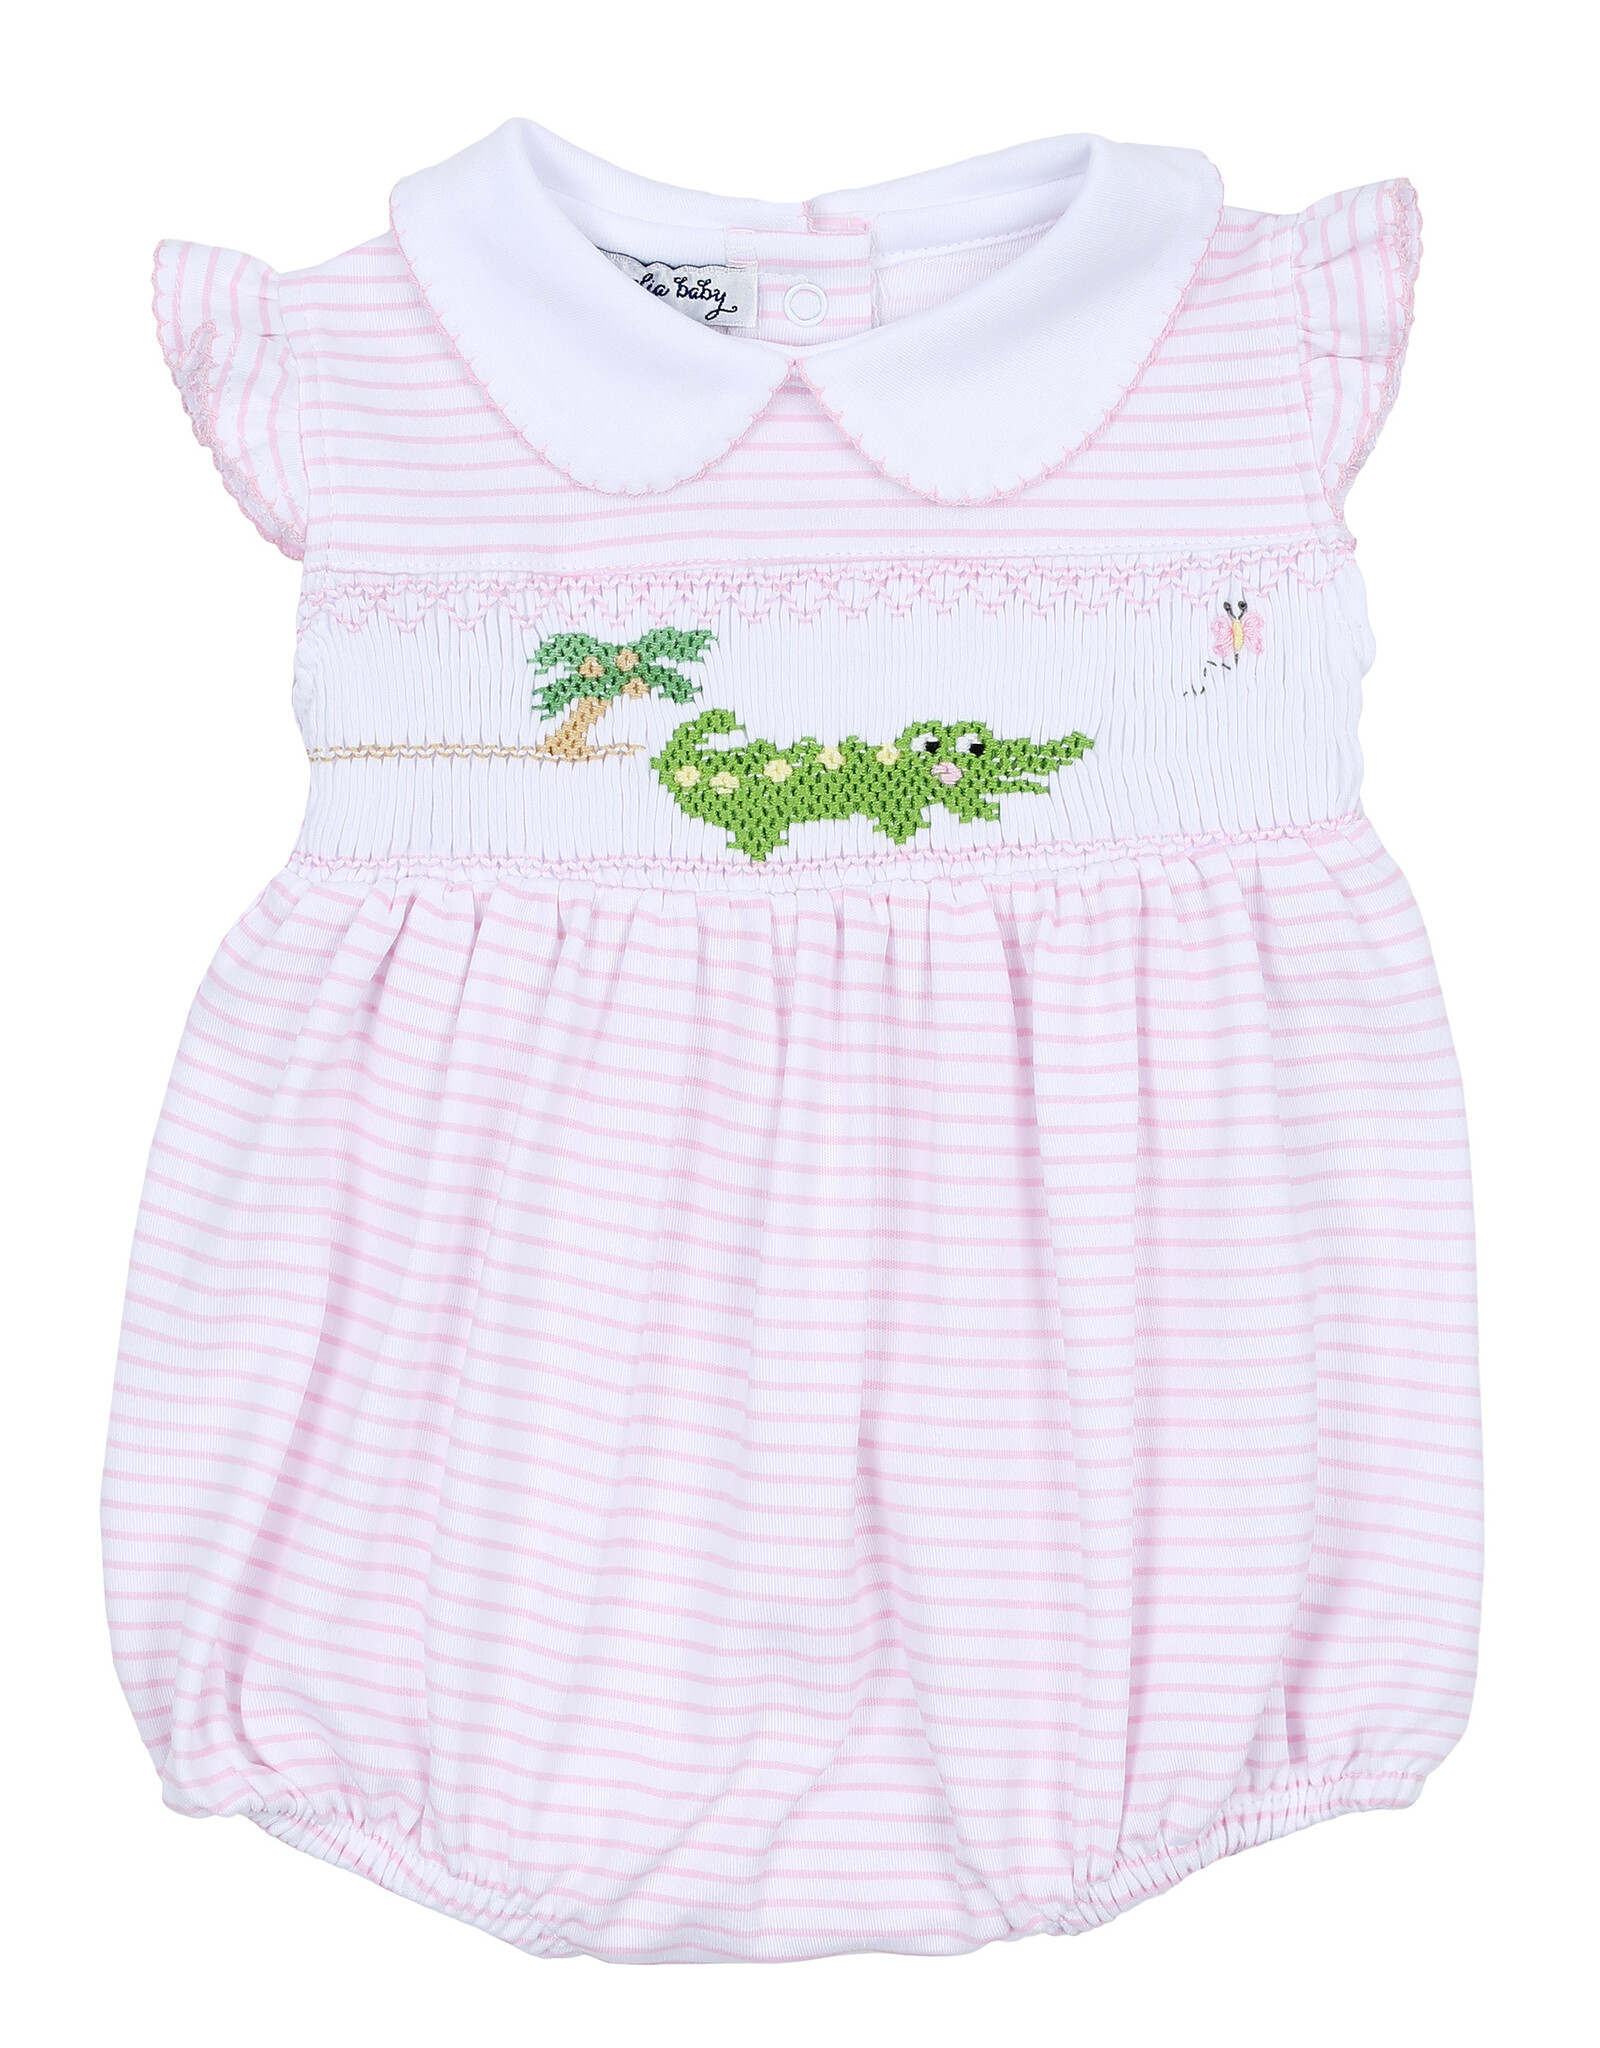 Magnolia Baby Pink Alligator Classics Smocked Flutters Bubble